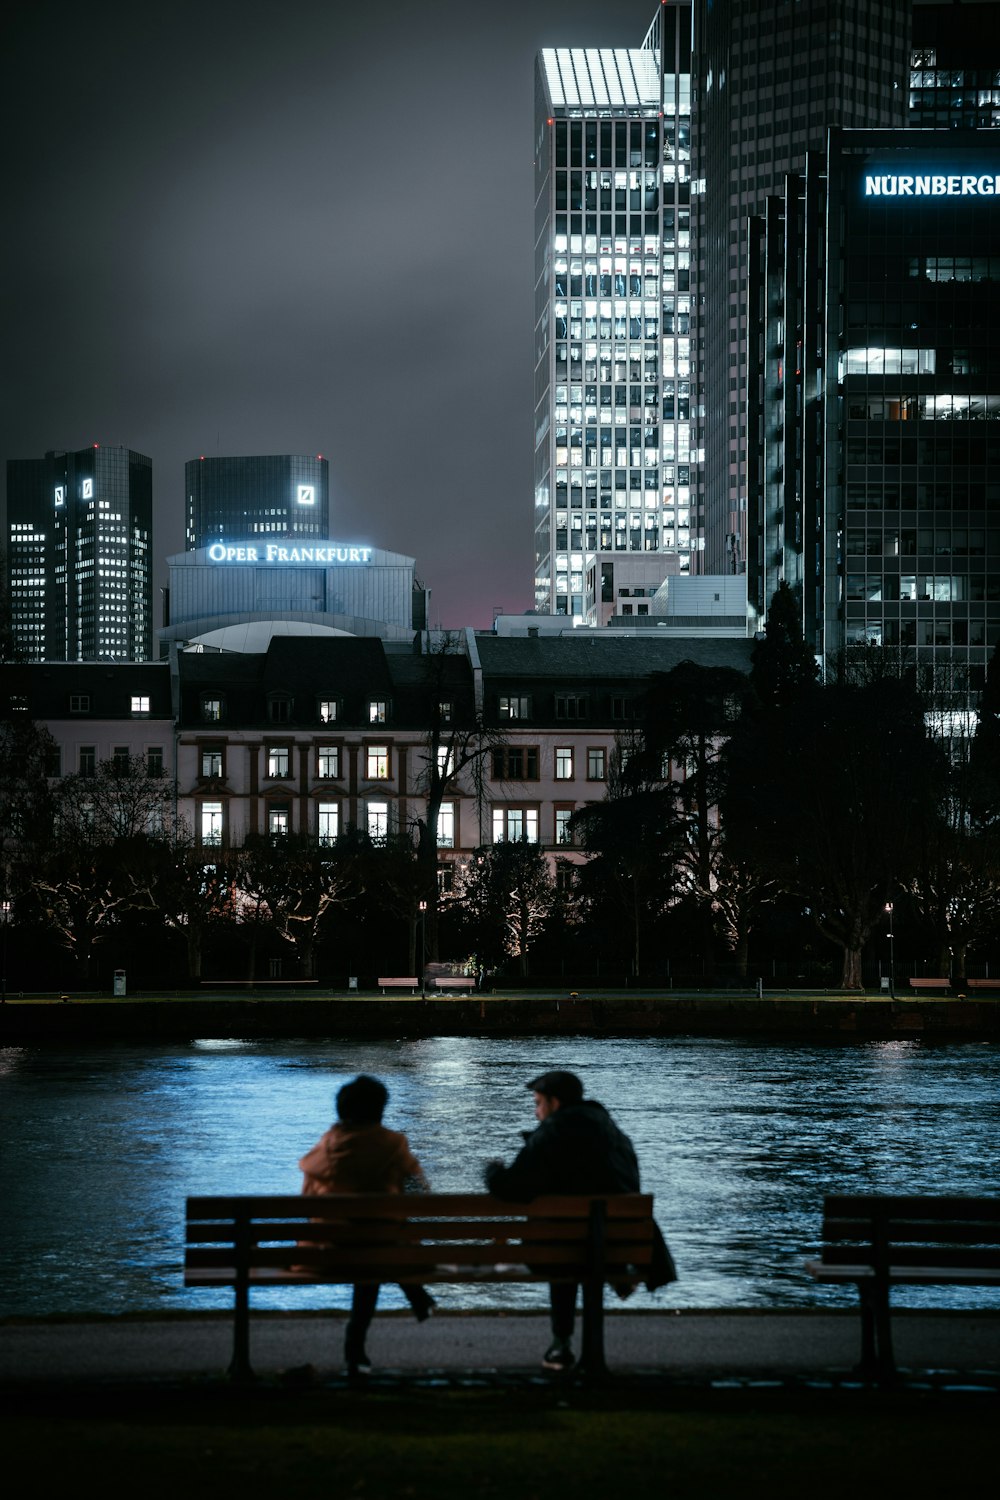 man and woman sitting on bench near body of water during night time